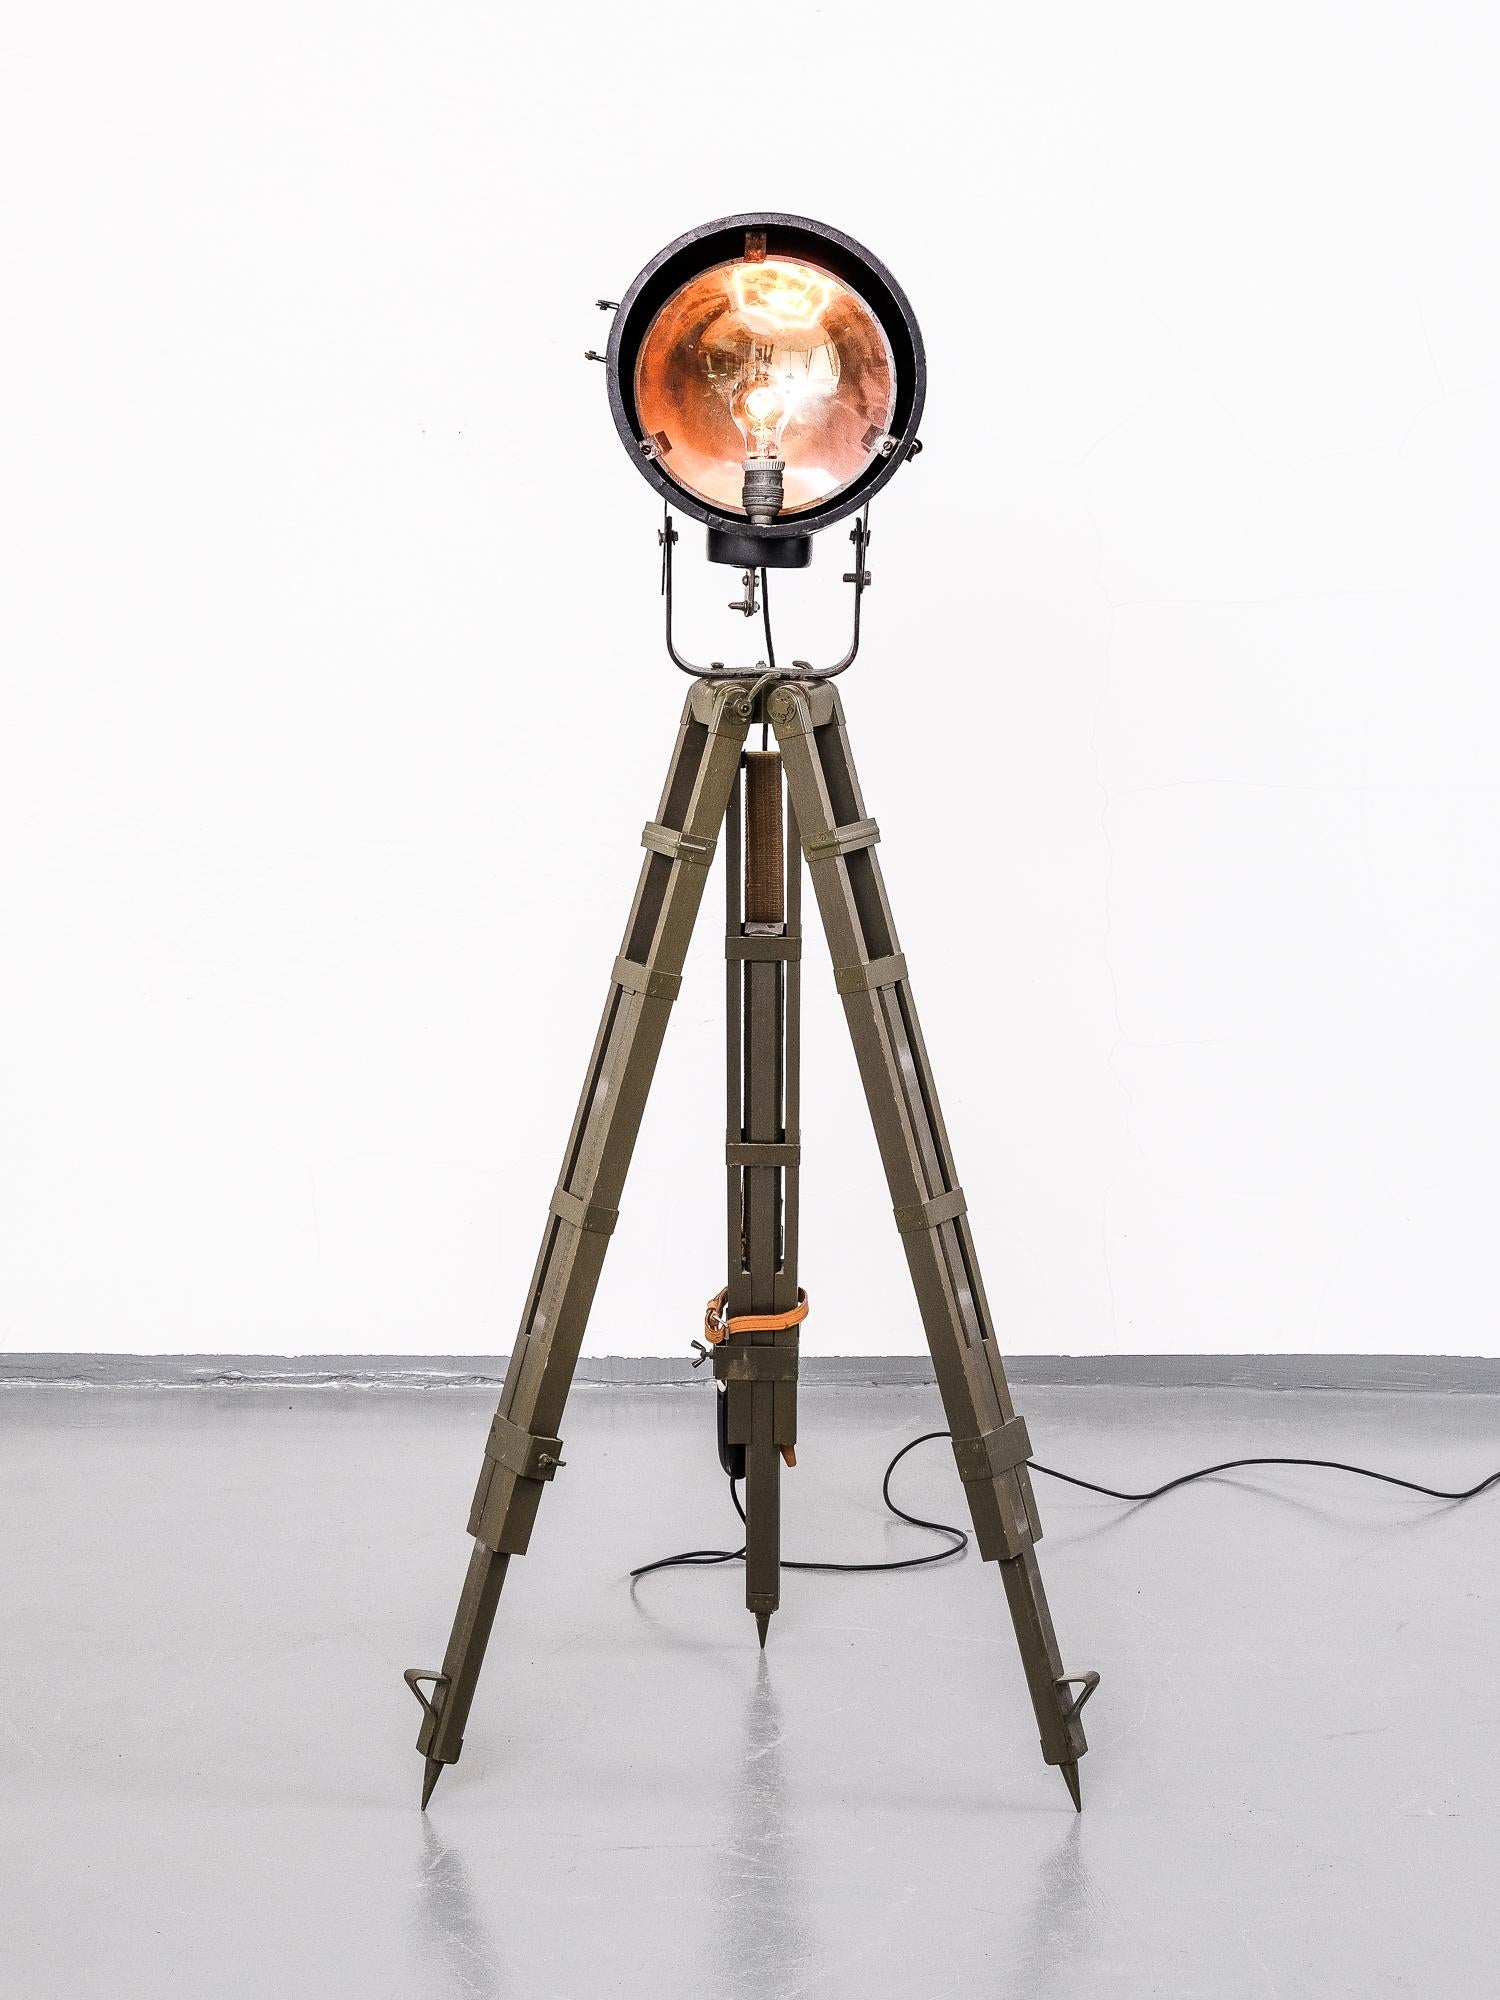 Industrial spotlight on wooden army green painted tripod. Adjustable height and angle.

Measures: Maximum height 190 cm
Spot diameter 30 cm

New wiring with dimmer, EU plug.